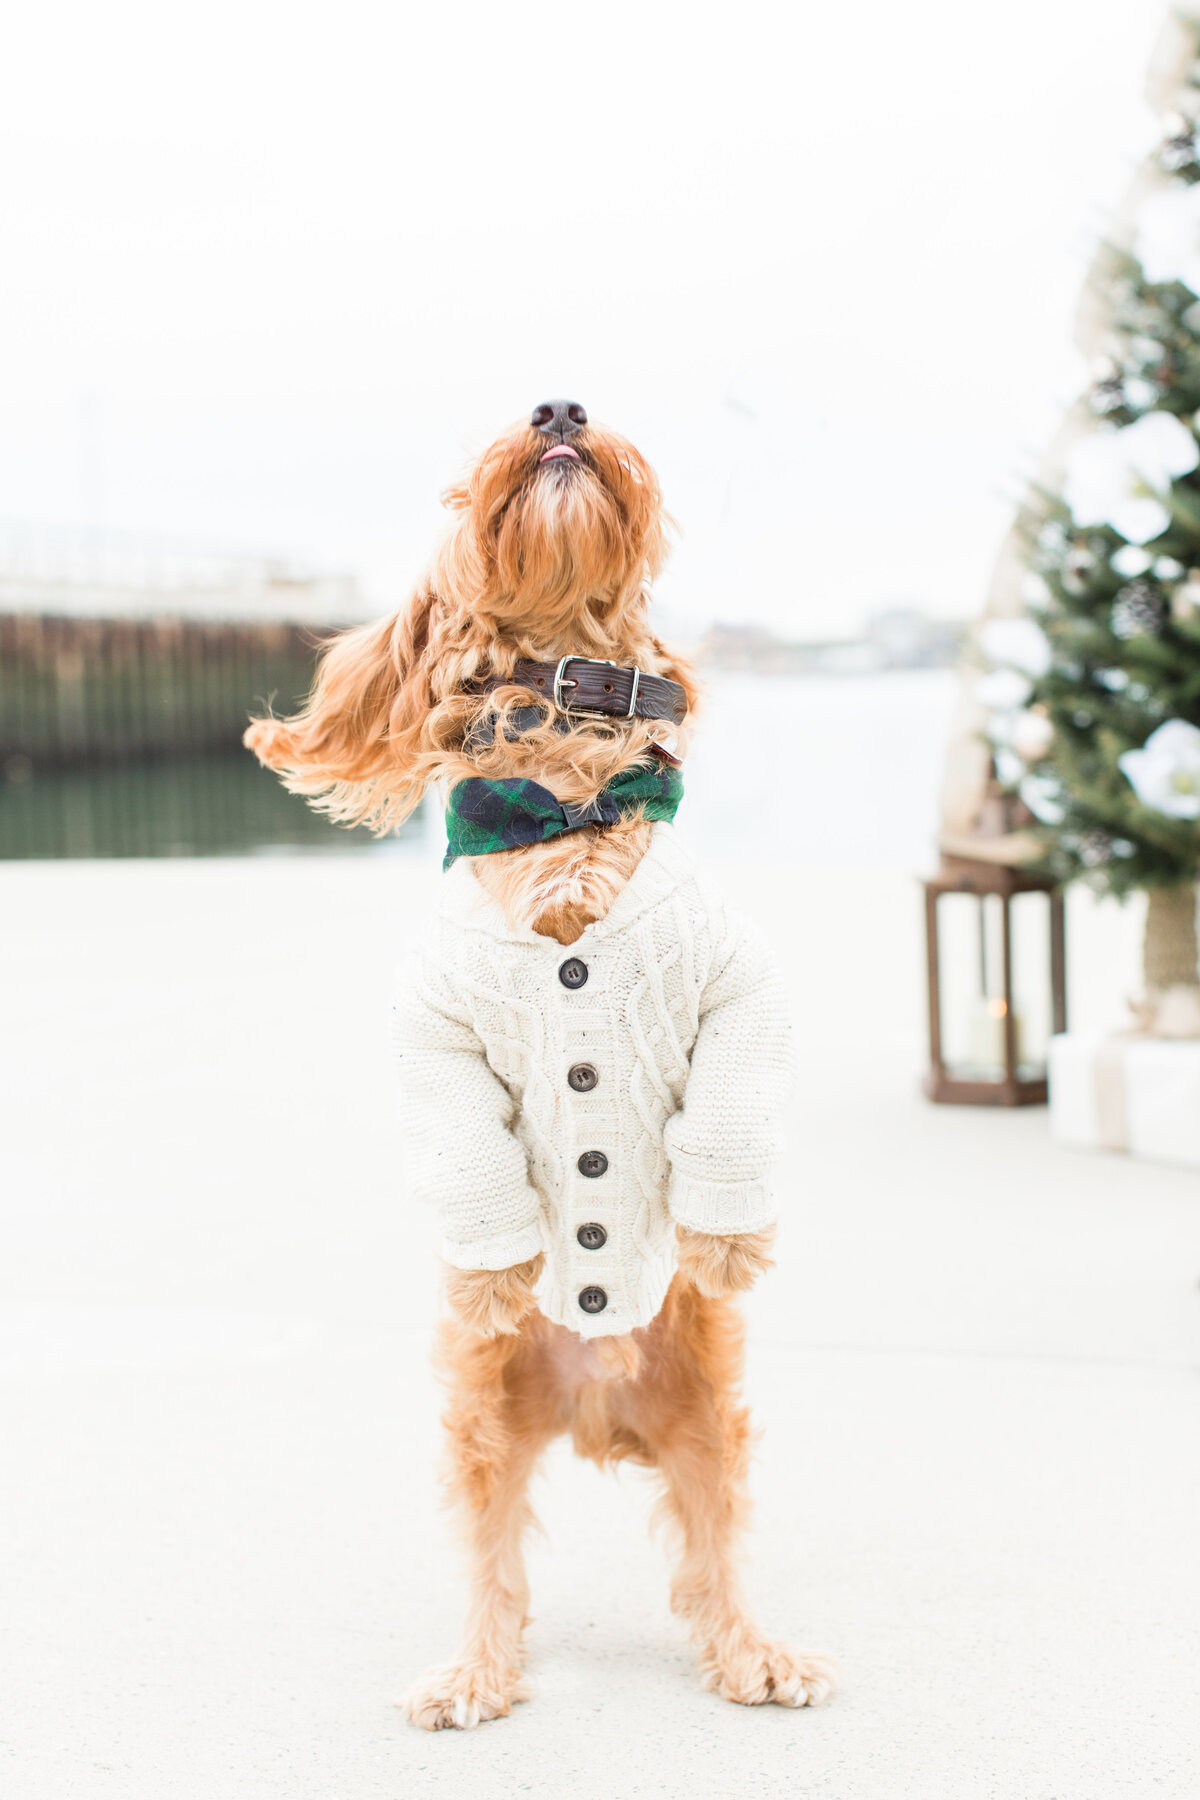 Goldendoodle wearing a sweater at Christmas